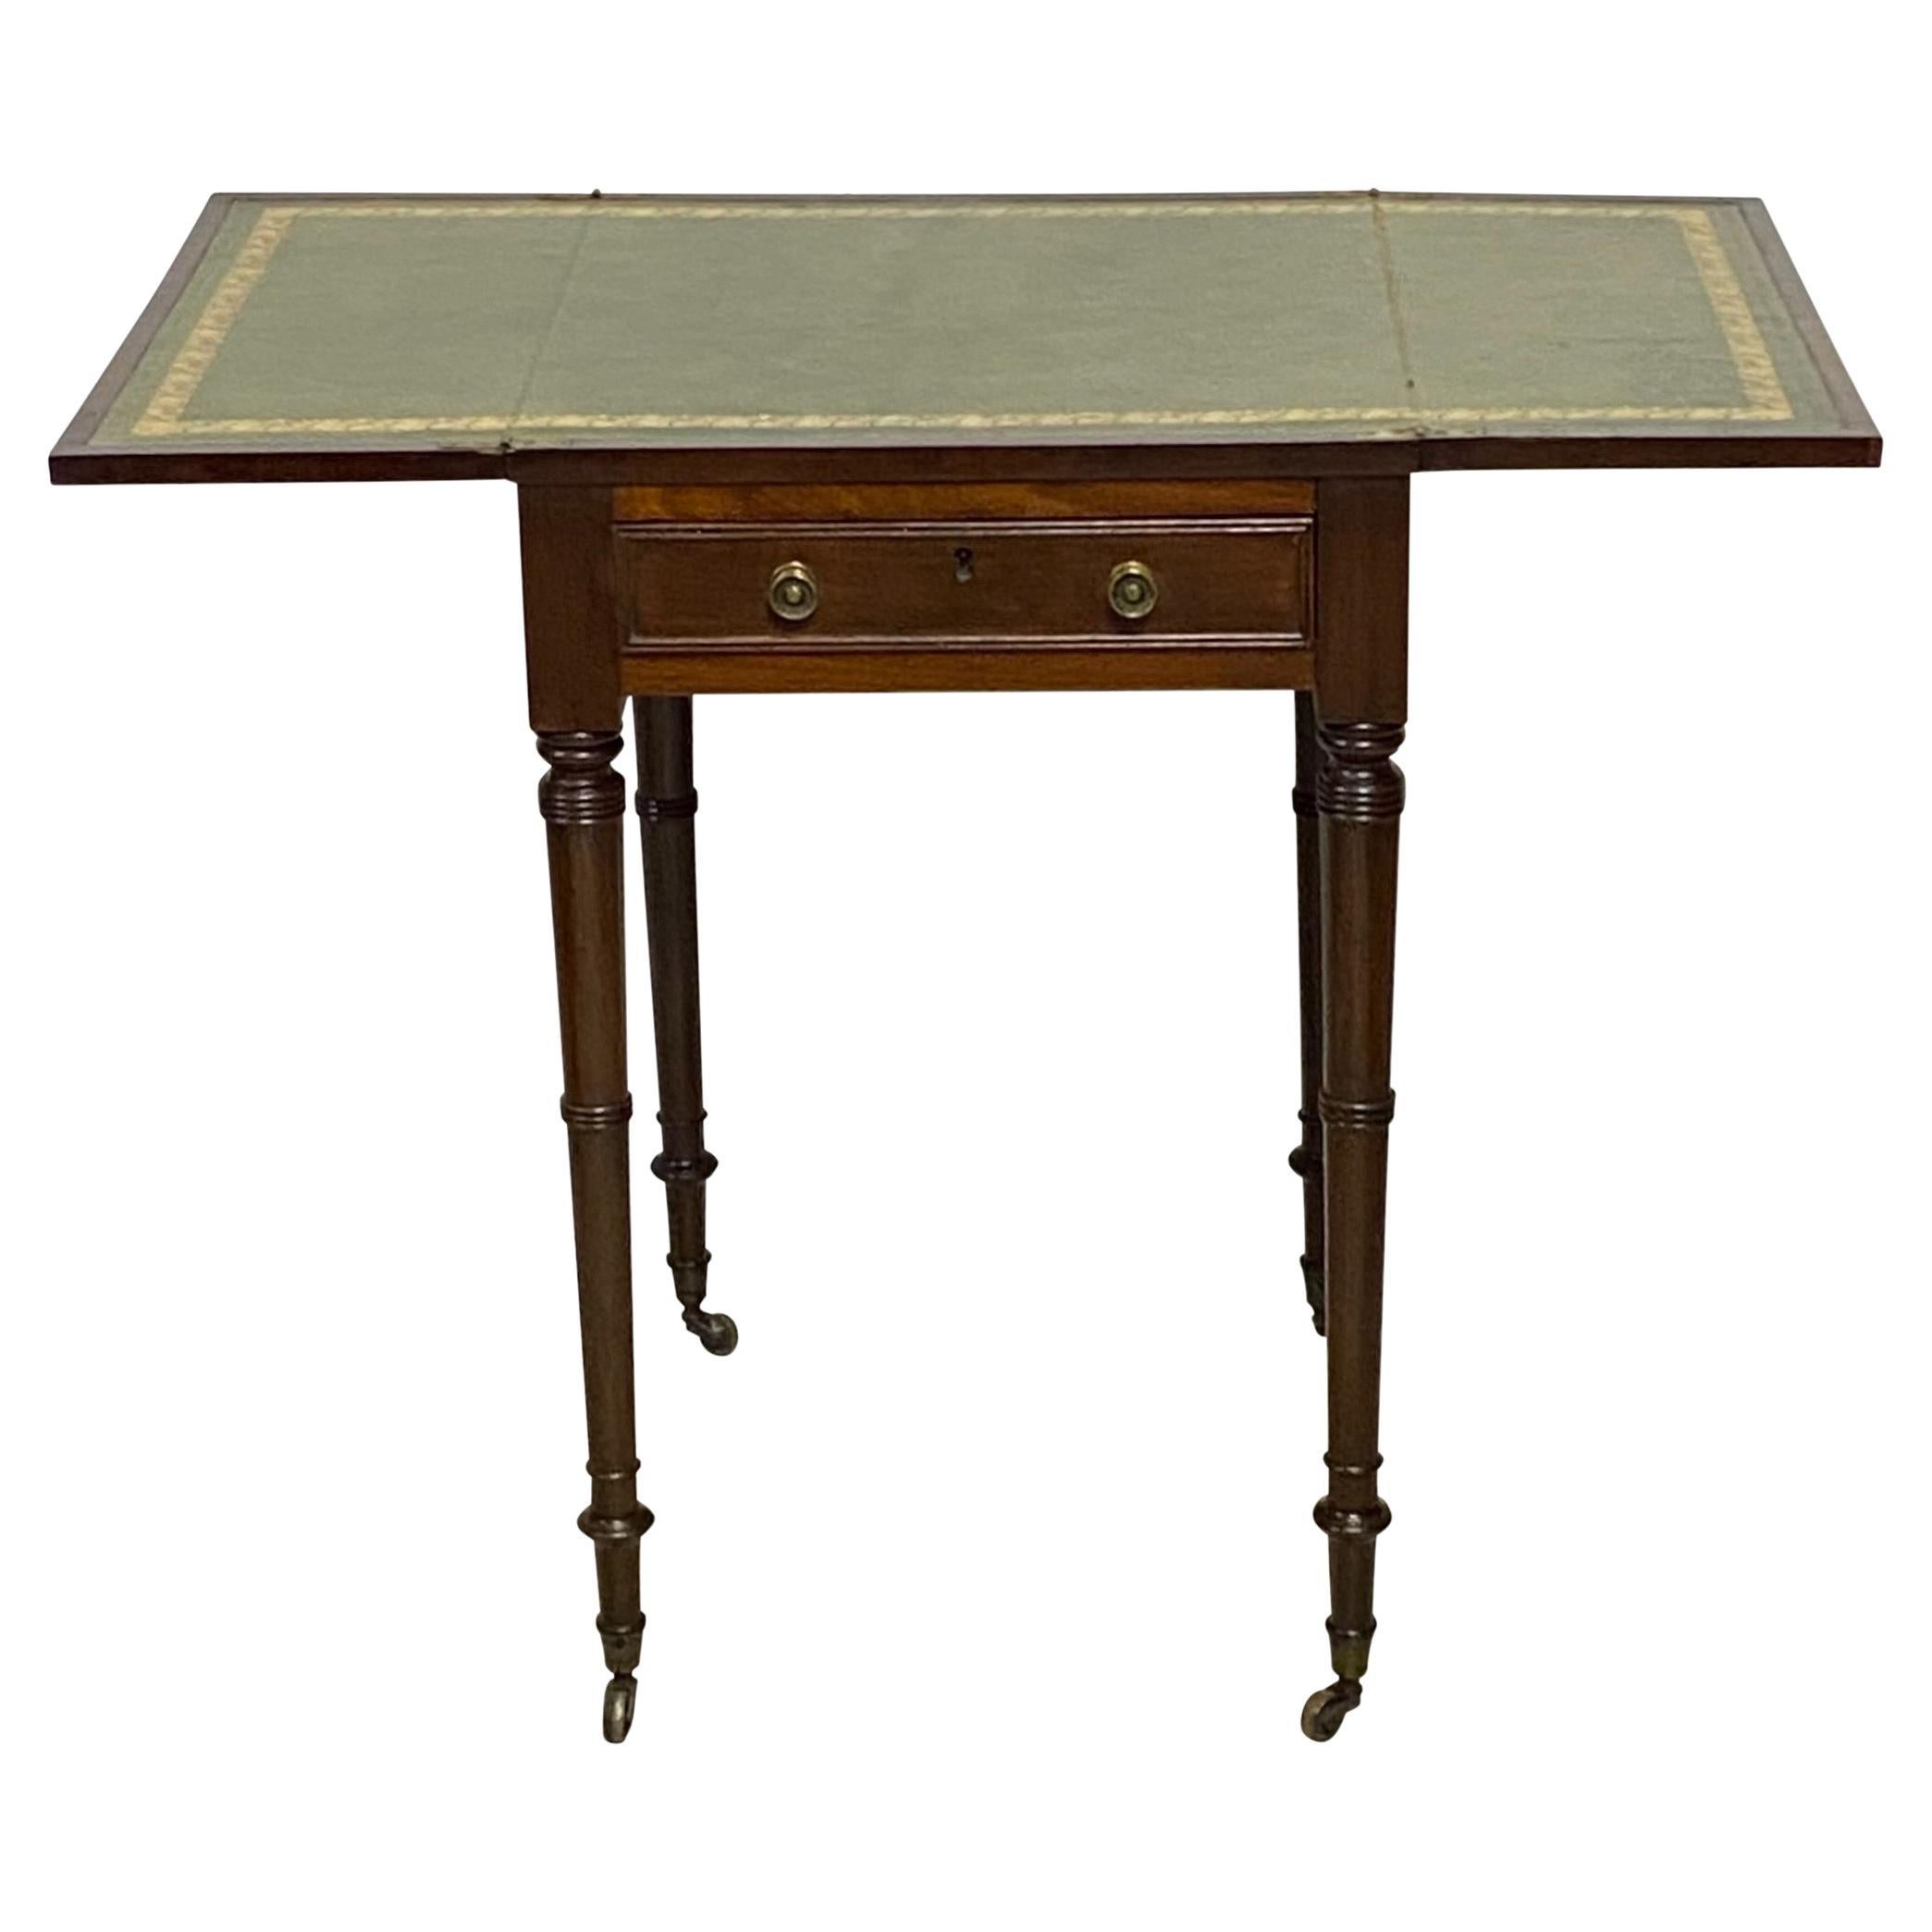 Regency Mahogany and Leather Side Table, English Early 19th Century